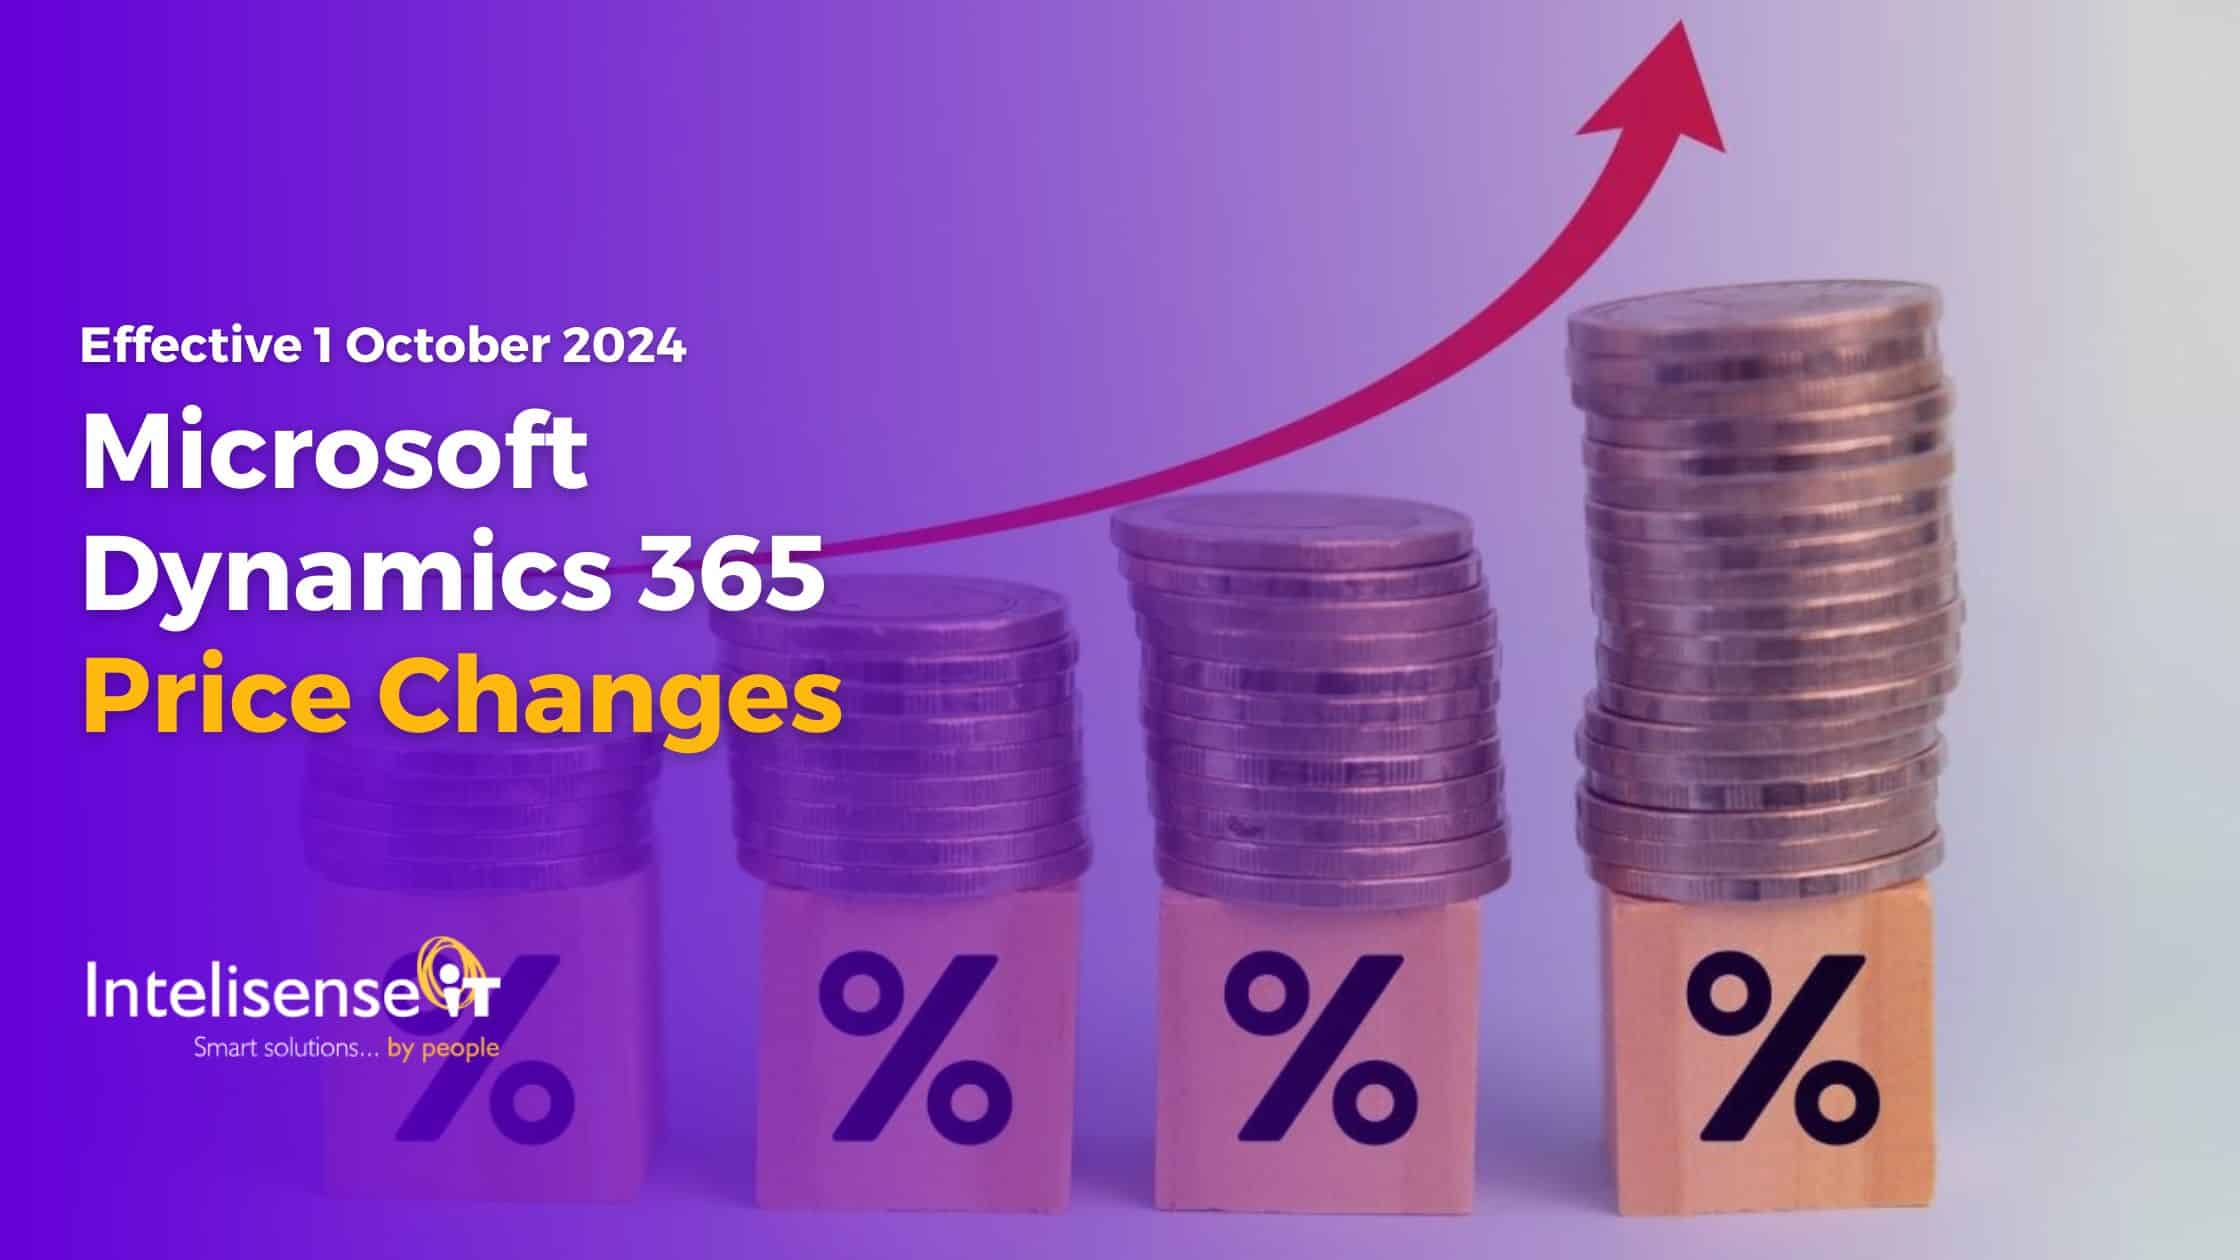 Important Update Microsoft Dynamics 365 Price Changes Effective 1 October 2024